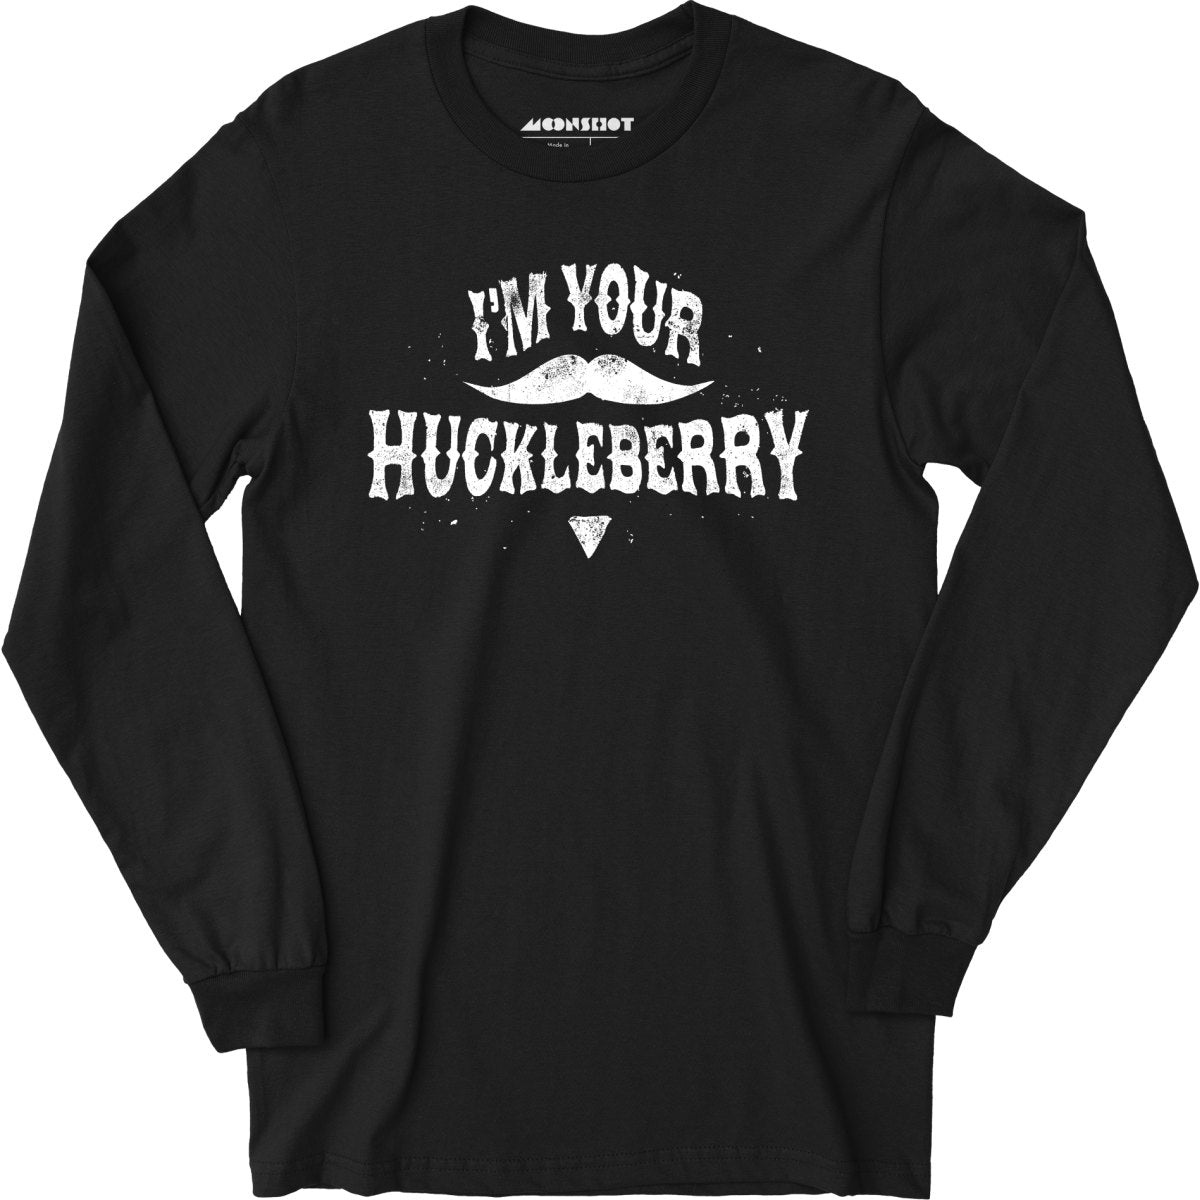 I'm Your Huckleberry - Long Sleeve T-Shirt